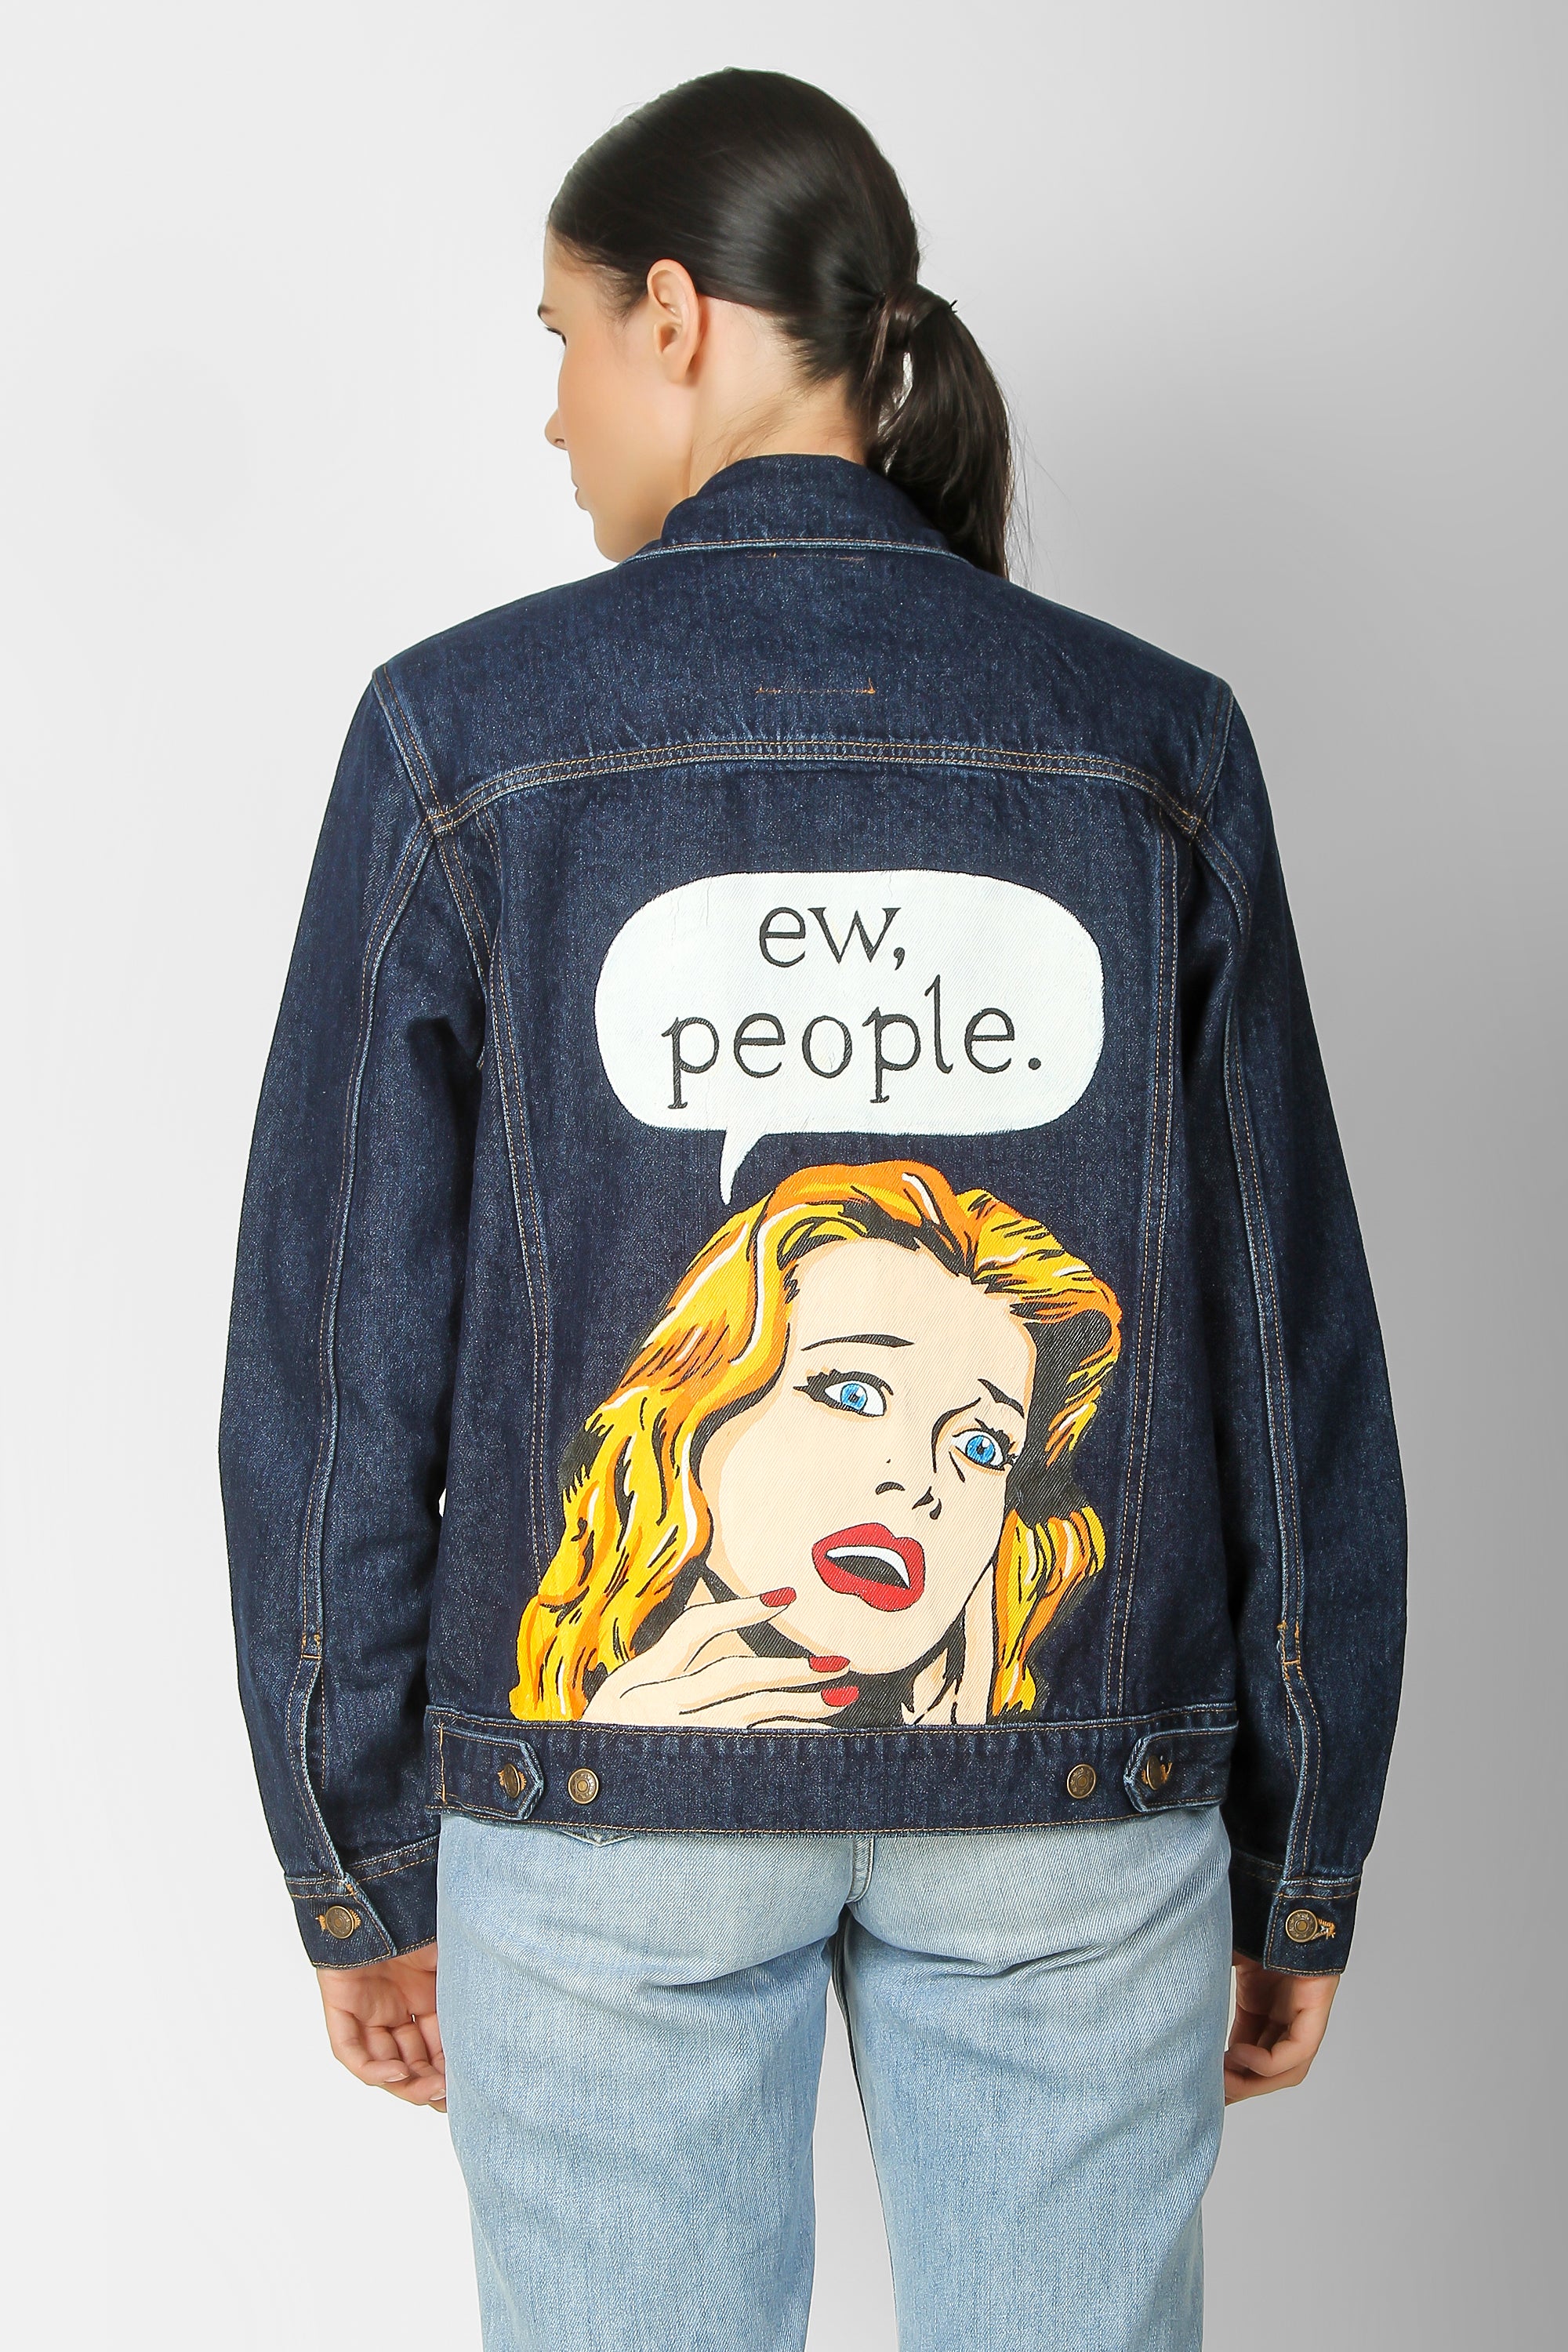 A Gap Jean Jacket Is the Travel Essential I Can't Live Without | Condé Nast  Traveler